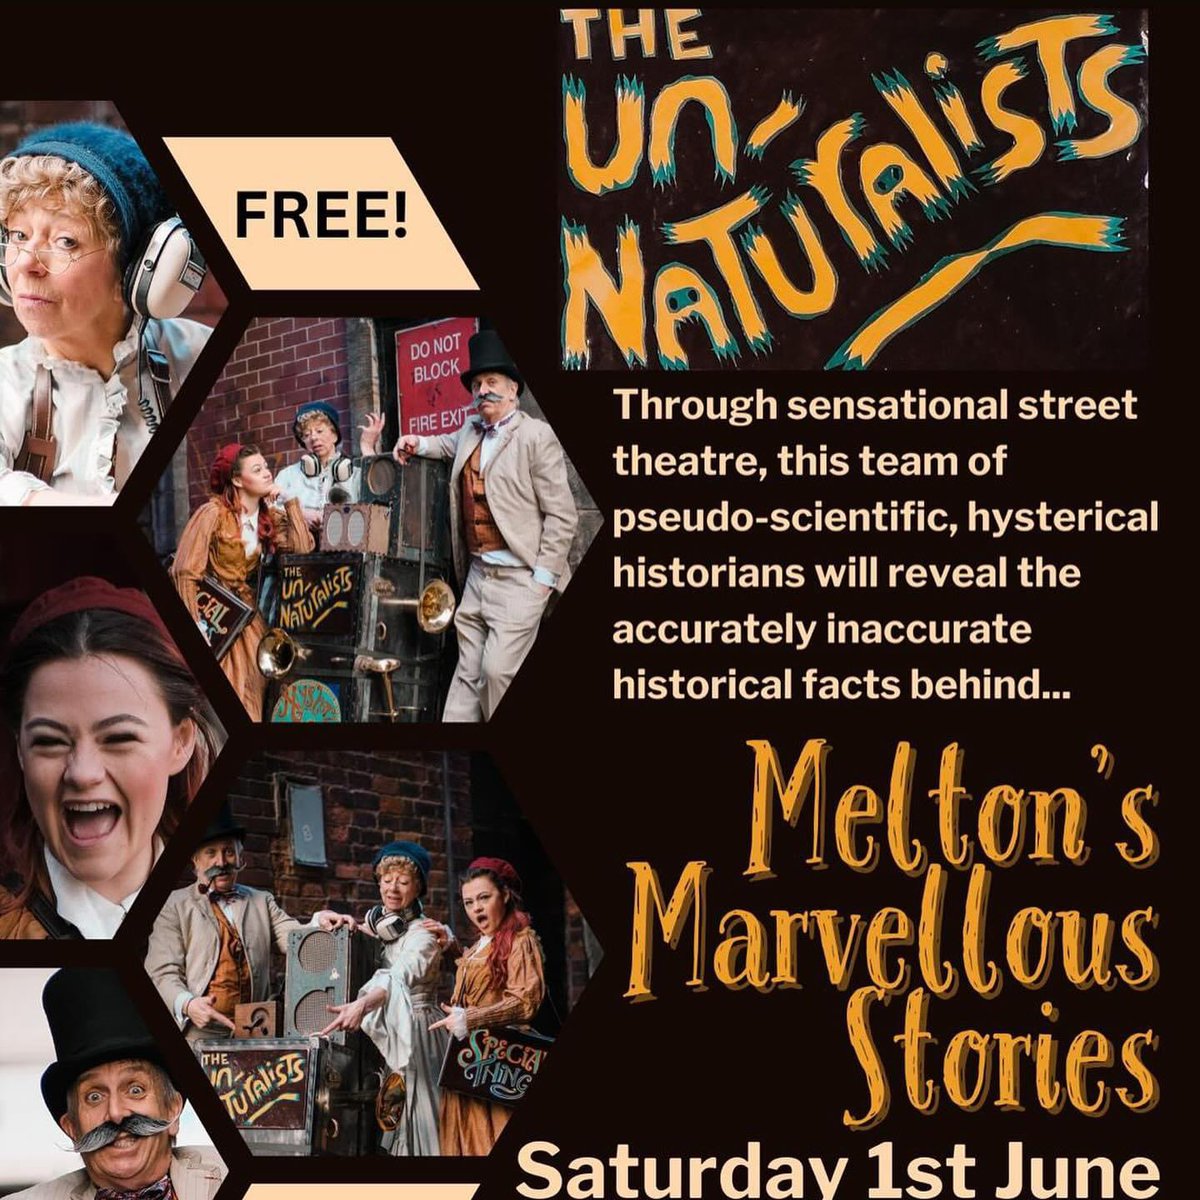 📅 Date for the diary, enjoy some fabulous Street Theatre & Melton’s Marvellous Stories on Saturday 1st June. For more information and to book your FREE tickets, sign up on Eventbrite @meltontimes @MyMelton6 @MeltonDirectory @nemmtweets #melton #meltonmowbray #streettheatre